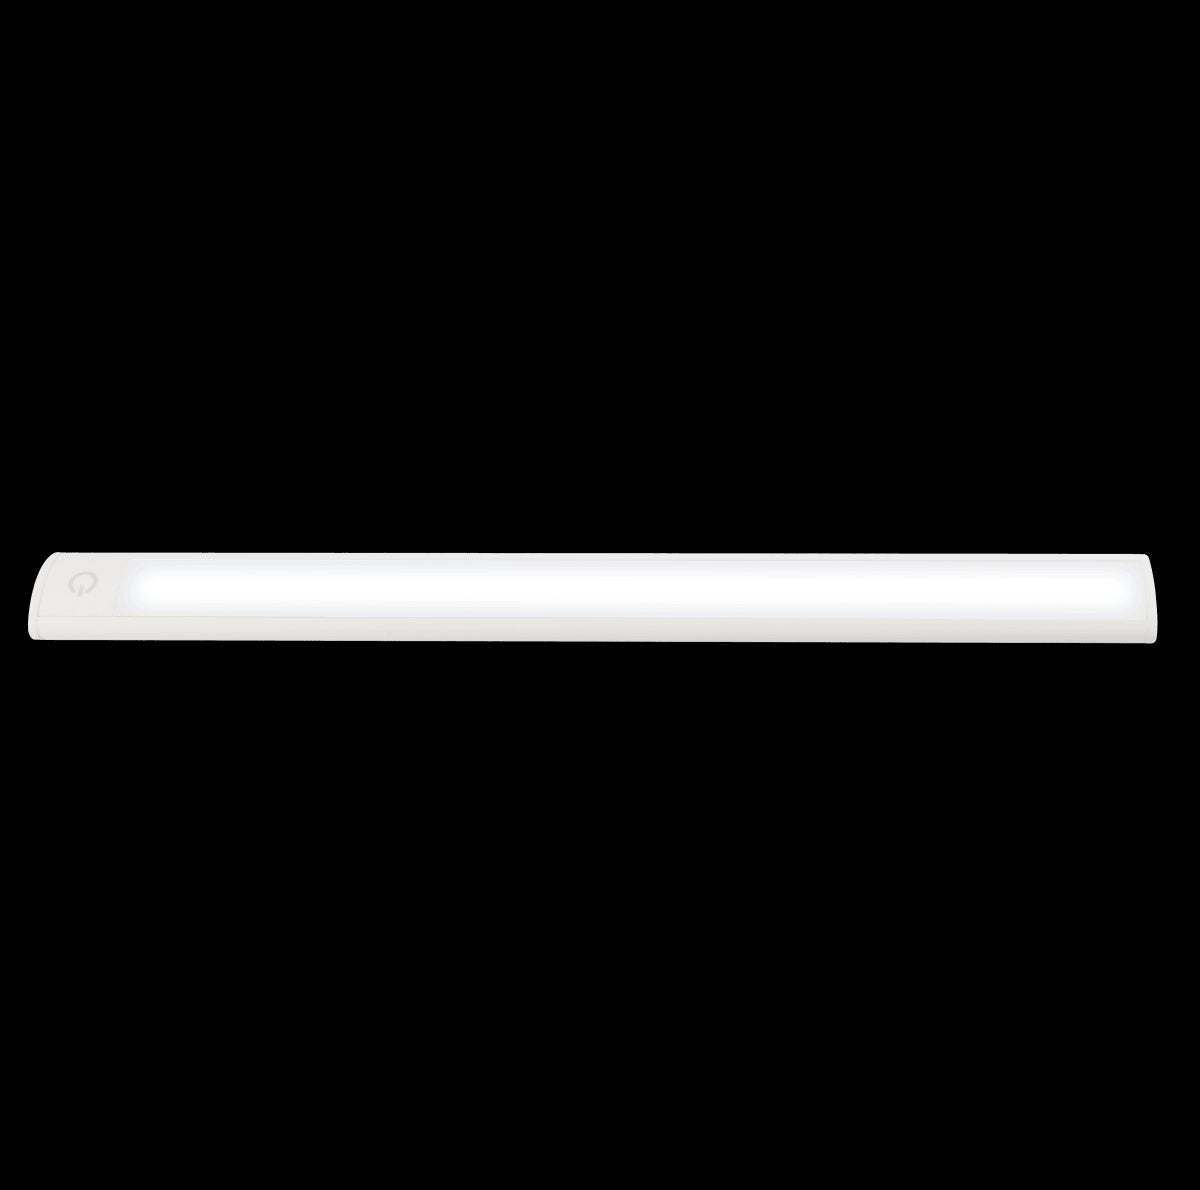 REGLETTE YILON PLASTIC WHITE 44 CM LED 3W NATURAL LIGHT WITH BATTERY WITH USB